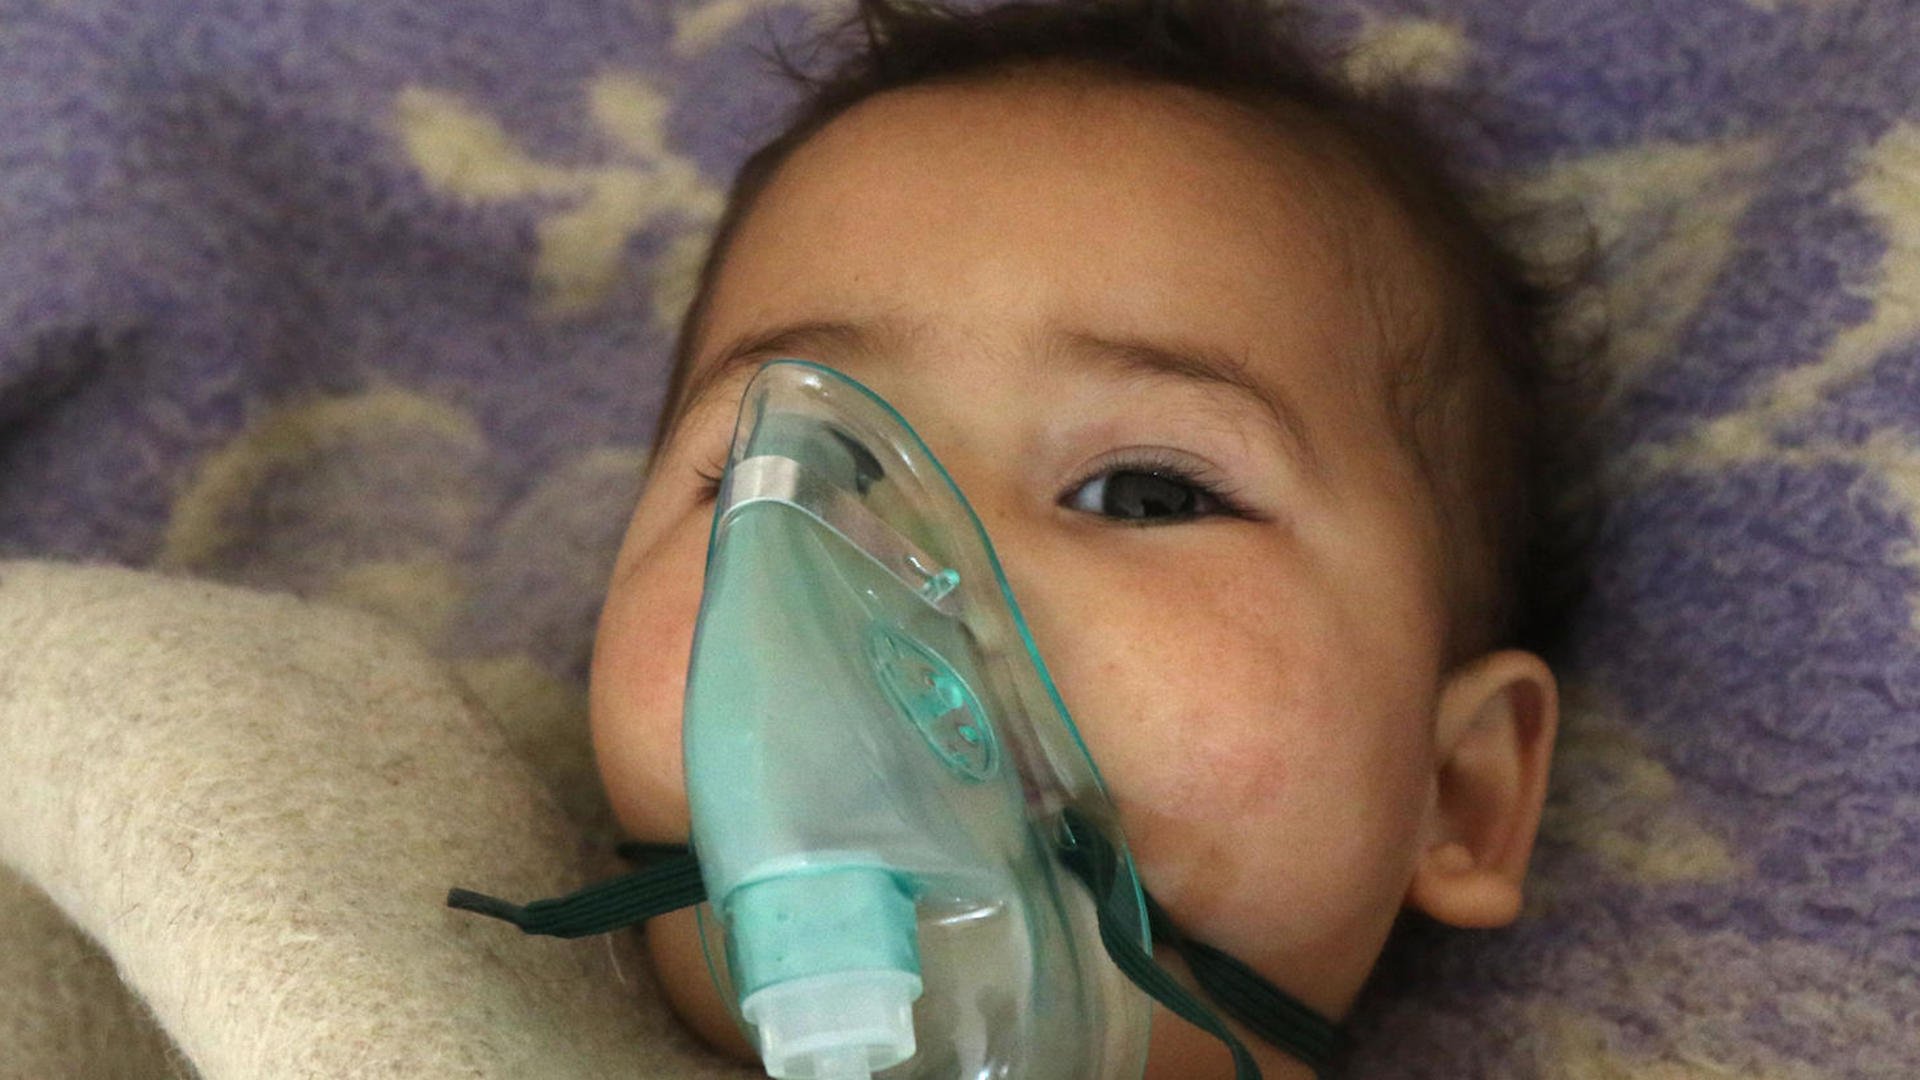 A small child injured in a suspected chemical gas attack in Idlib, Syria receives treatment  with an oxygen mask